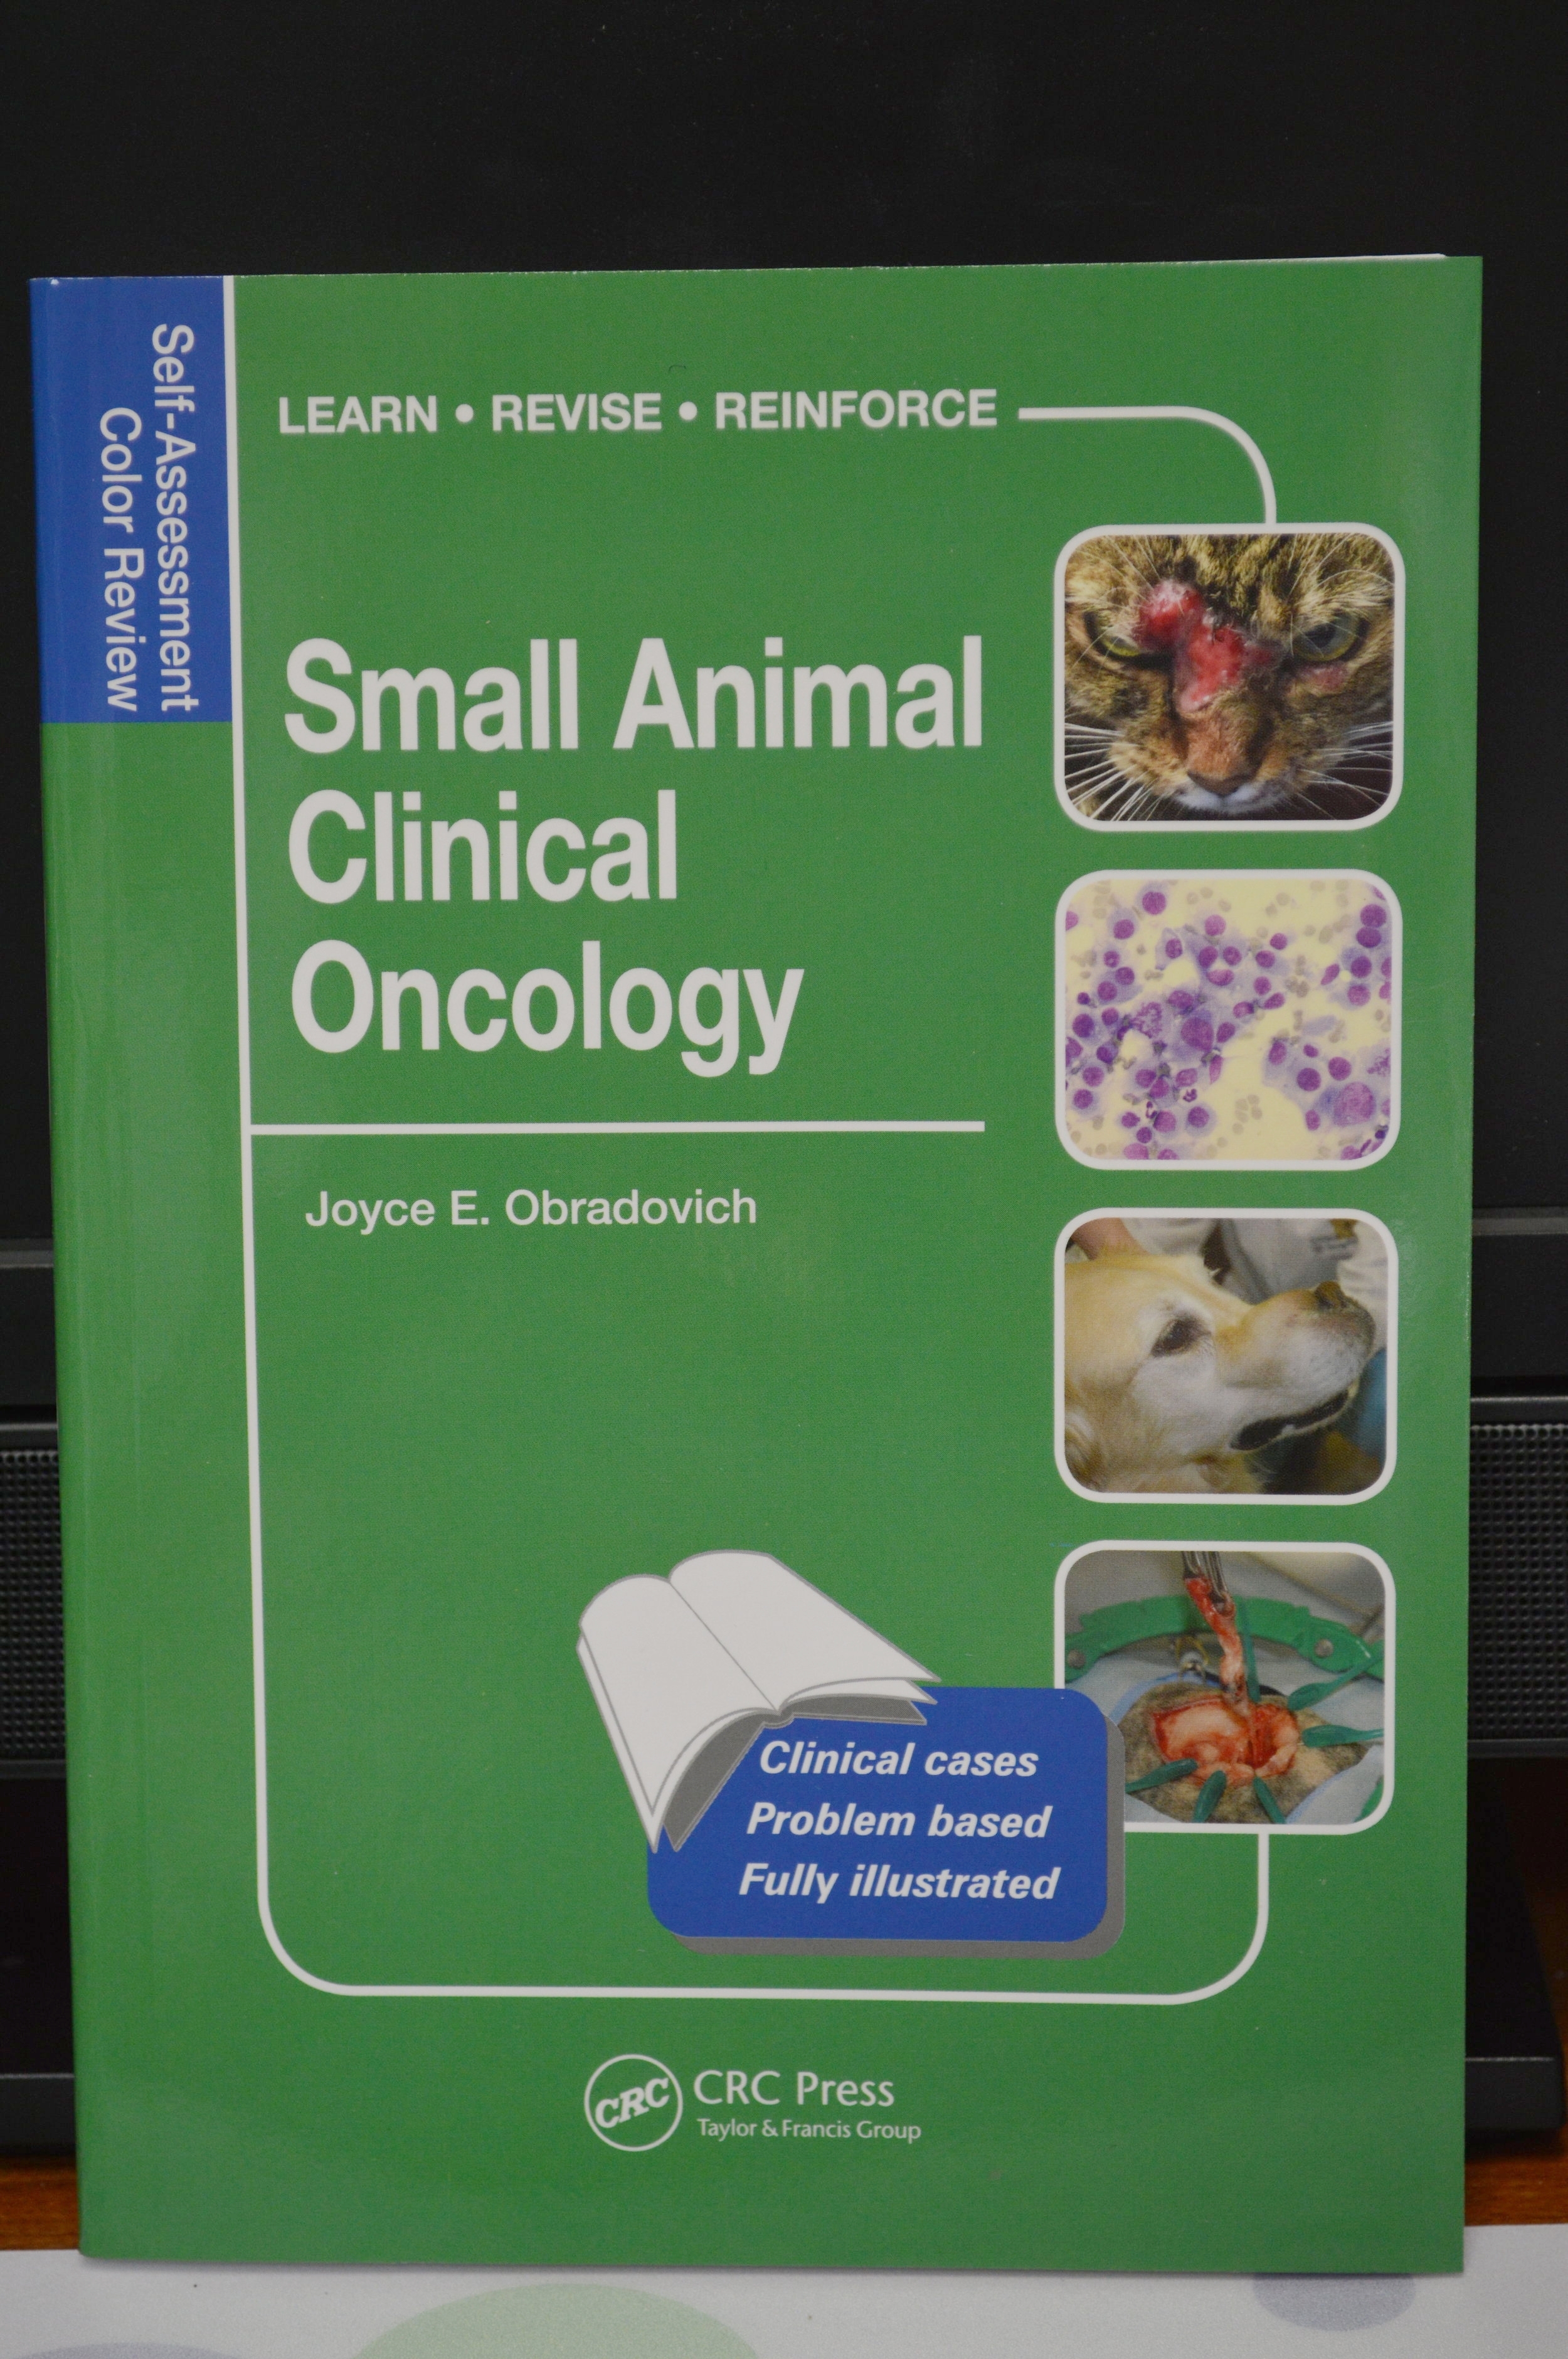 Animal Cancer and Imaging Center